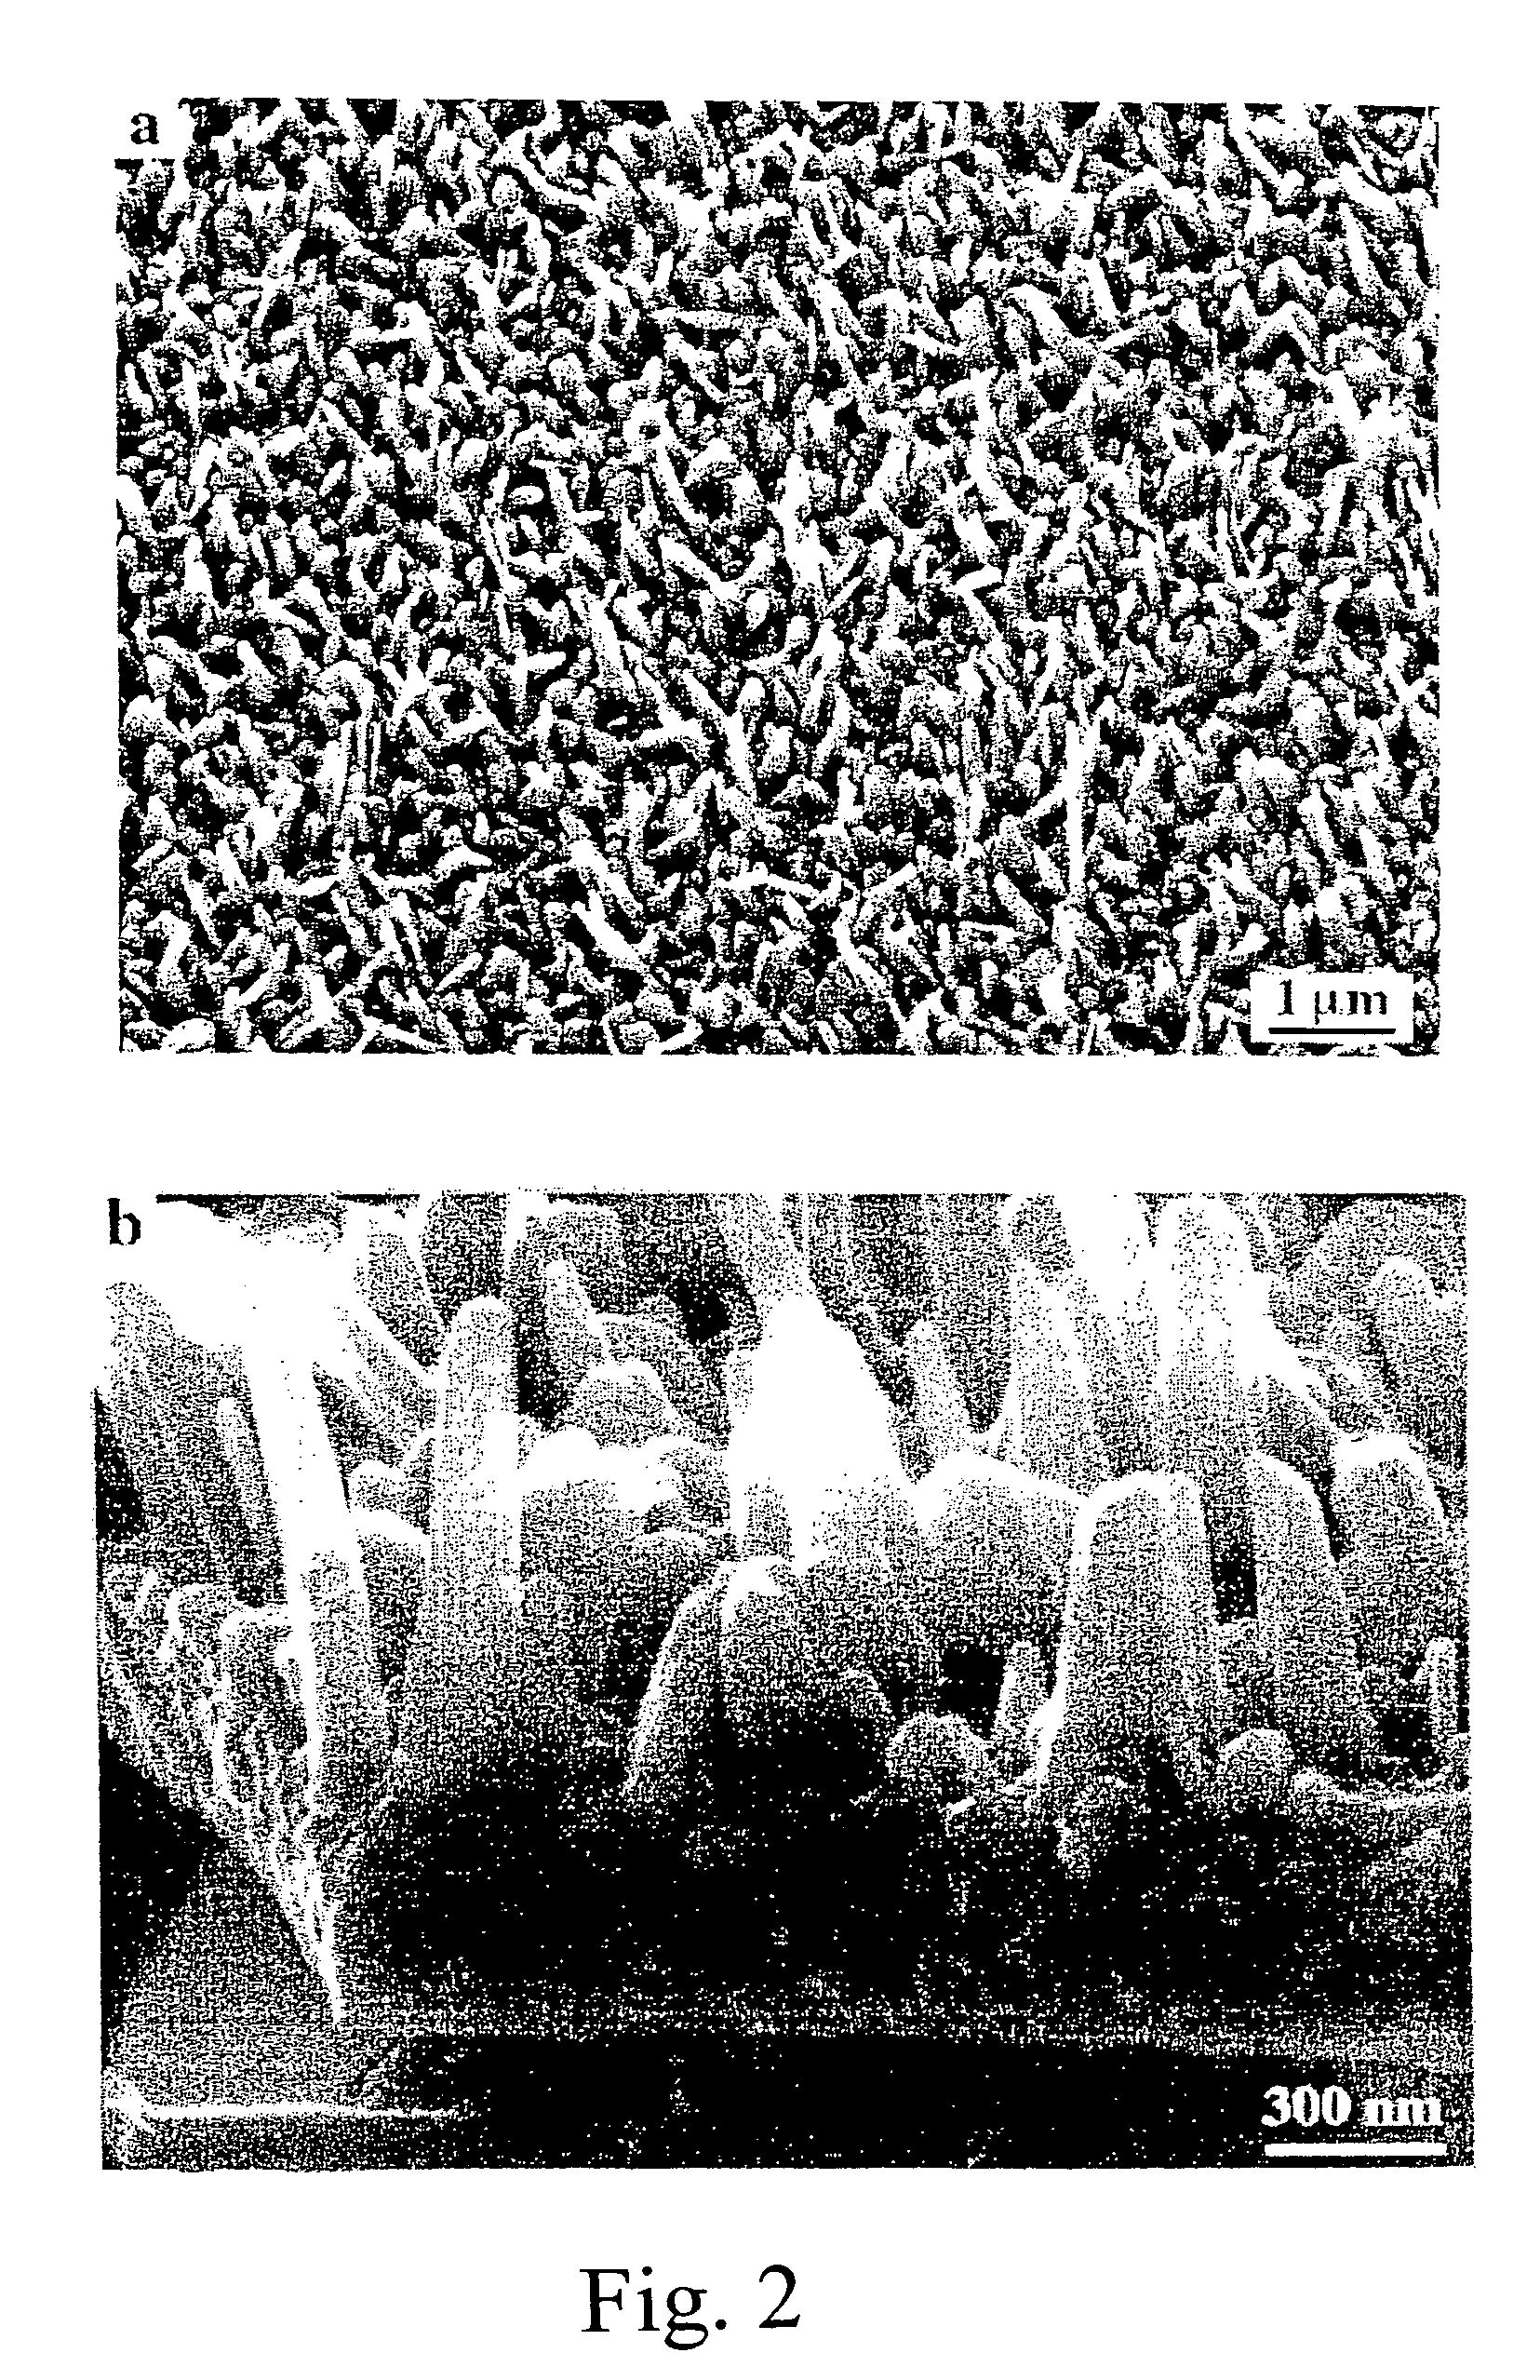 Protected alloy surfaces in microchannel apparatus and catalysts, alumina supported catalysts, catalyst intermediates, and methods of forming catalysts and microchannel apparatus